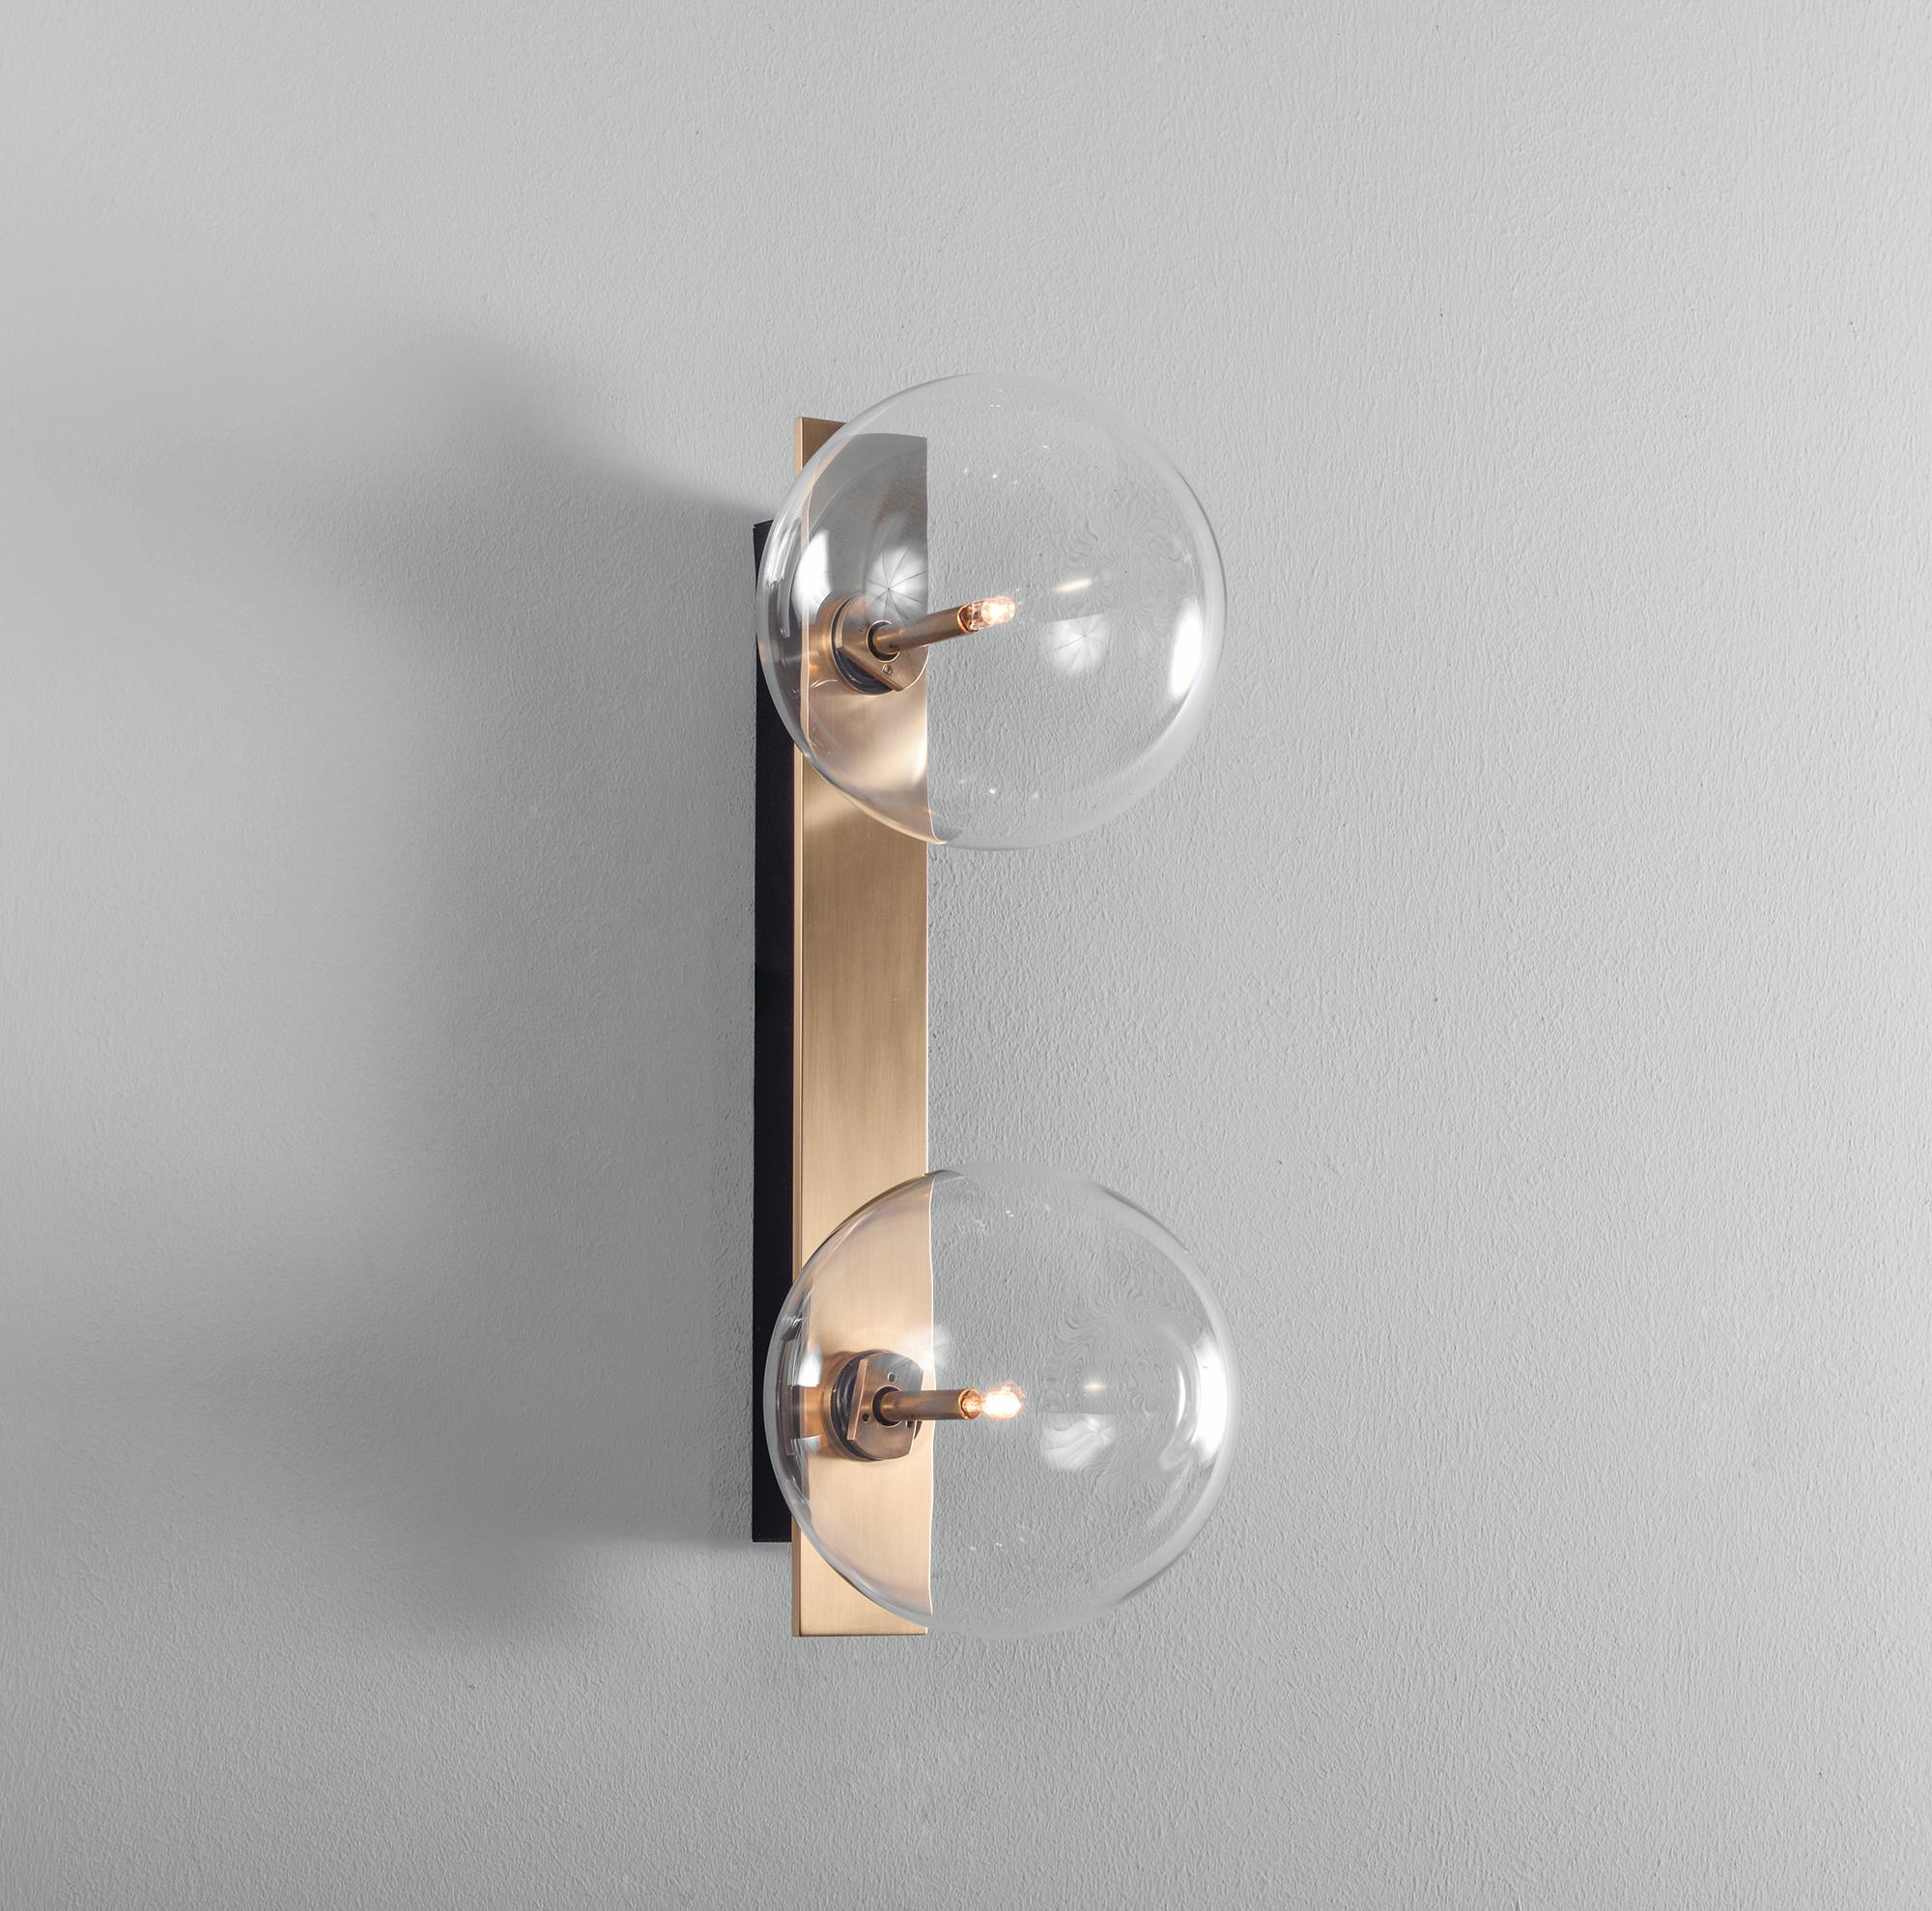 Oslo Dual Brass Wall Sconce by Schwung
Dimensions: W 15 x D 19 x H 40 cm
Materials: Solid brass, hand blown glass globes

Finishes available: Black gunmetal, polished nickel, brass


Schwung is a German word, and loosely defined, means energy or